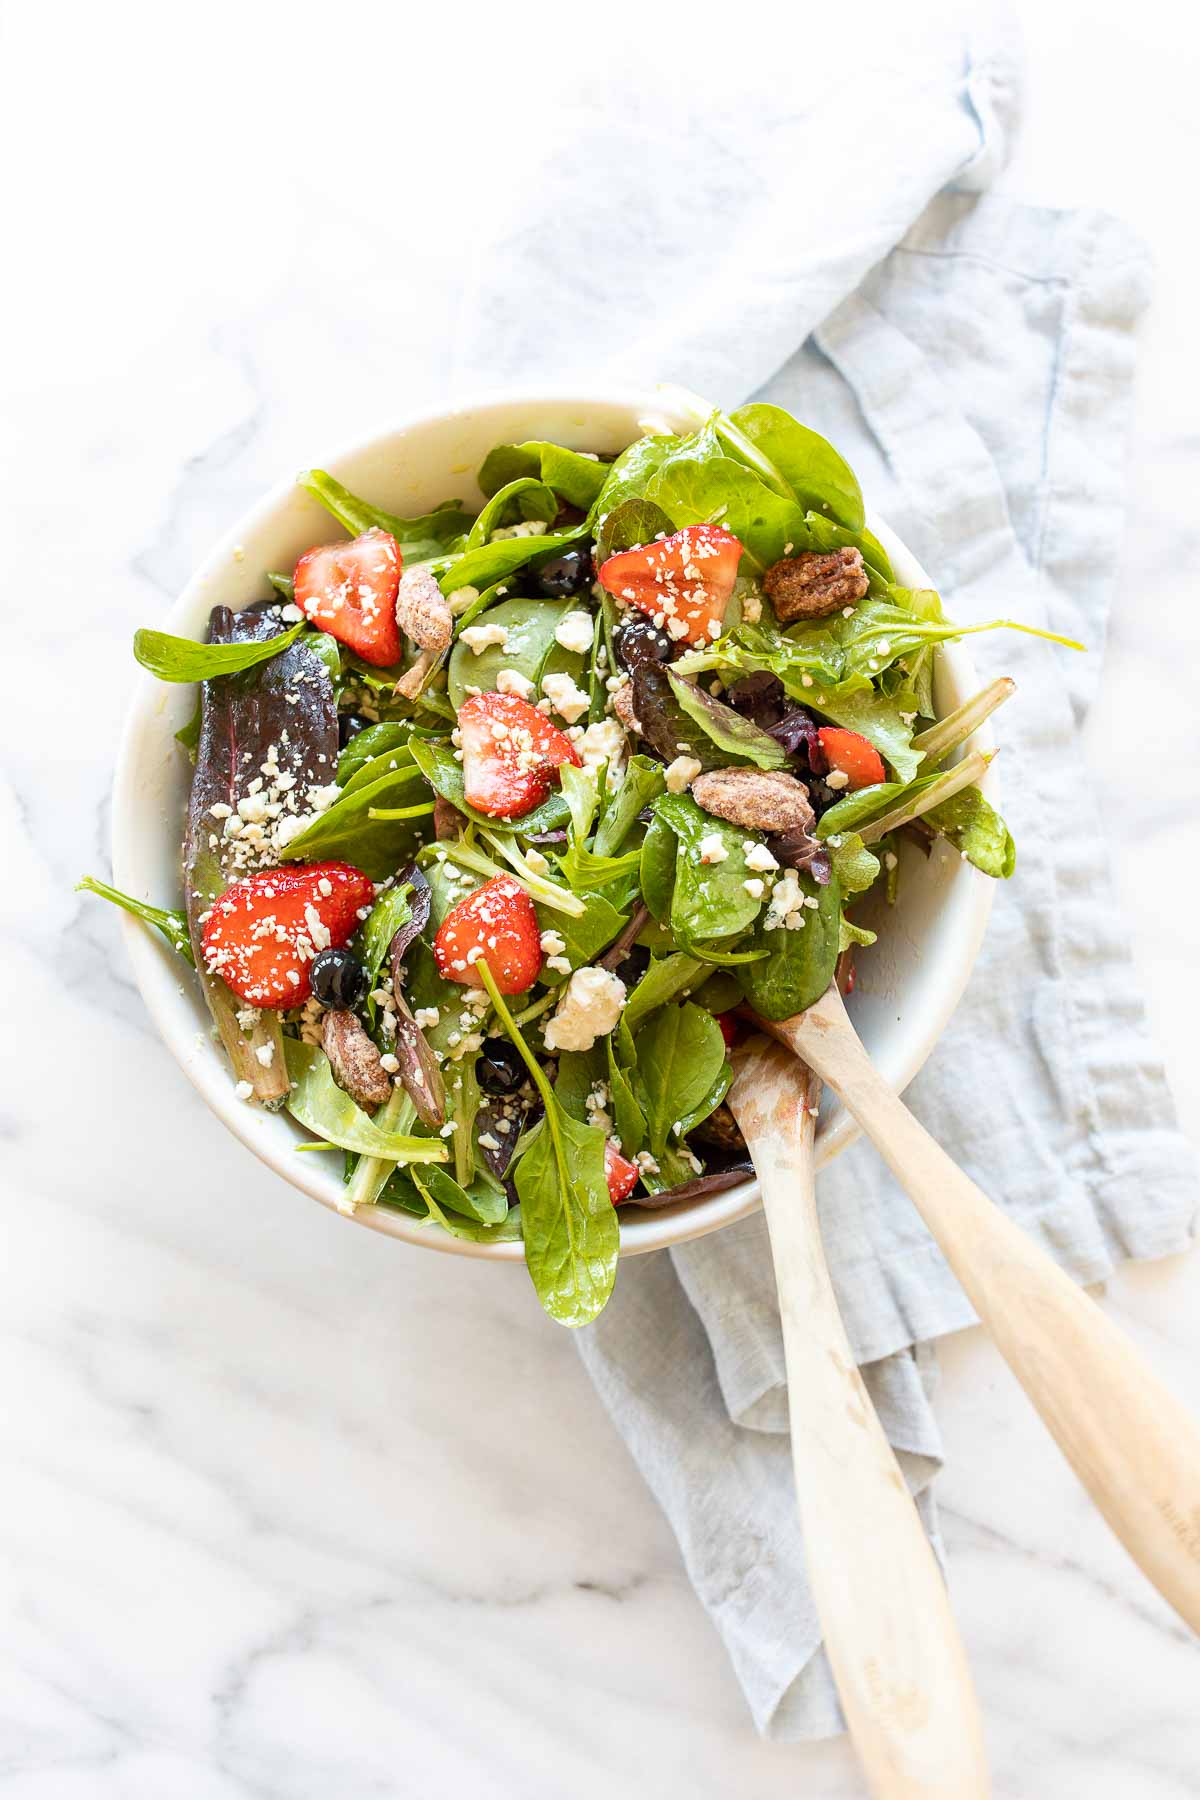 A fresh spring salad with berries, crumbled cheese and nuts in a bowl with wooden serving utensils.